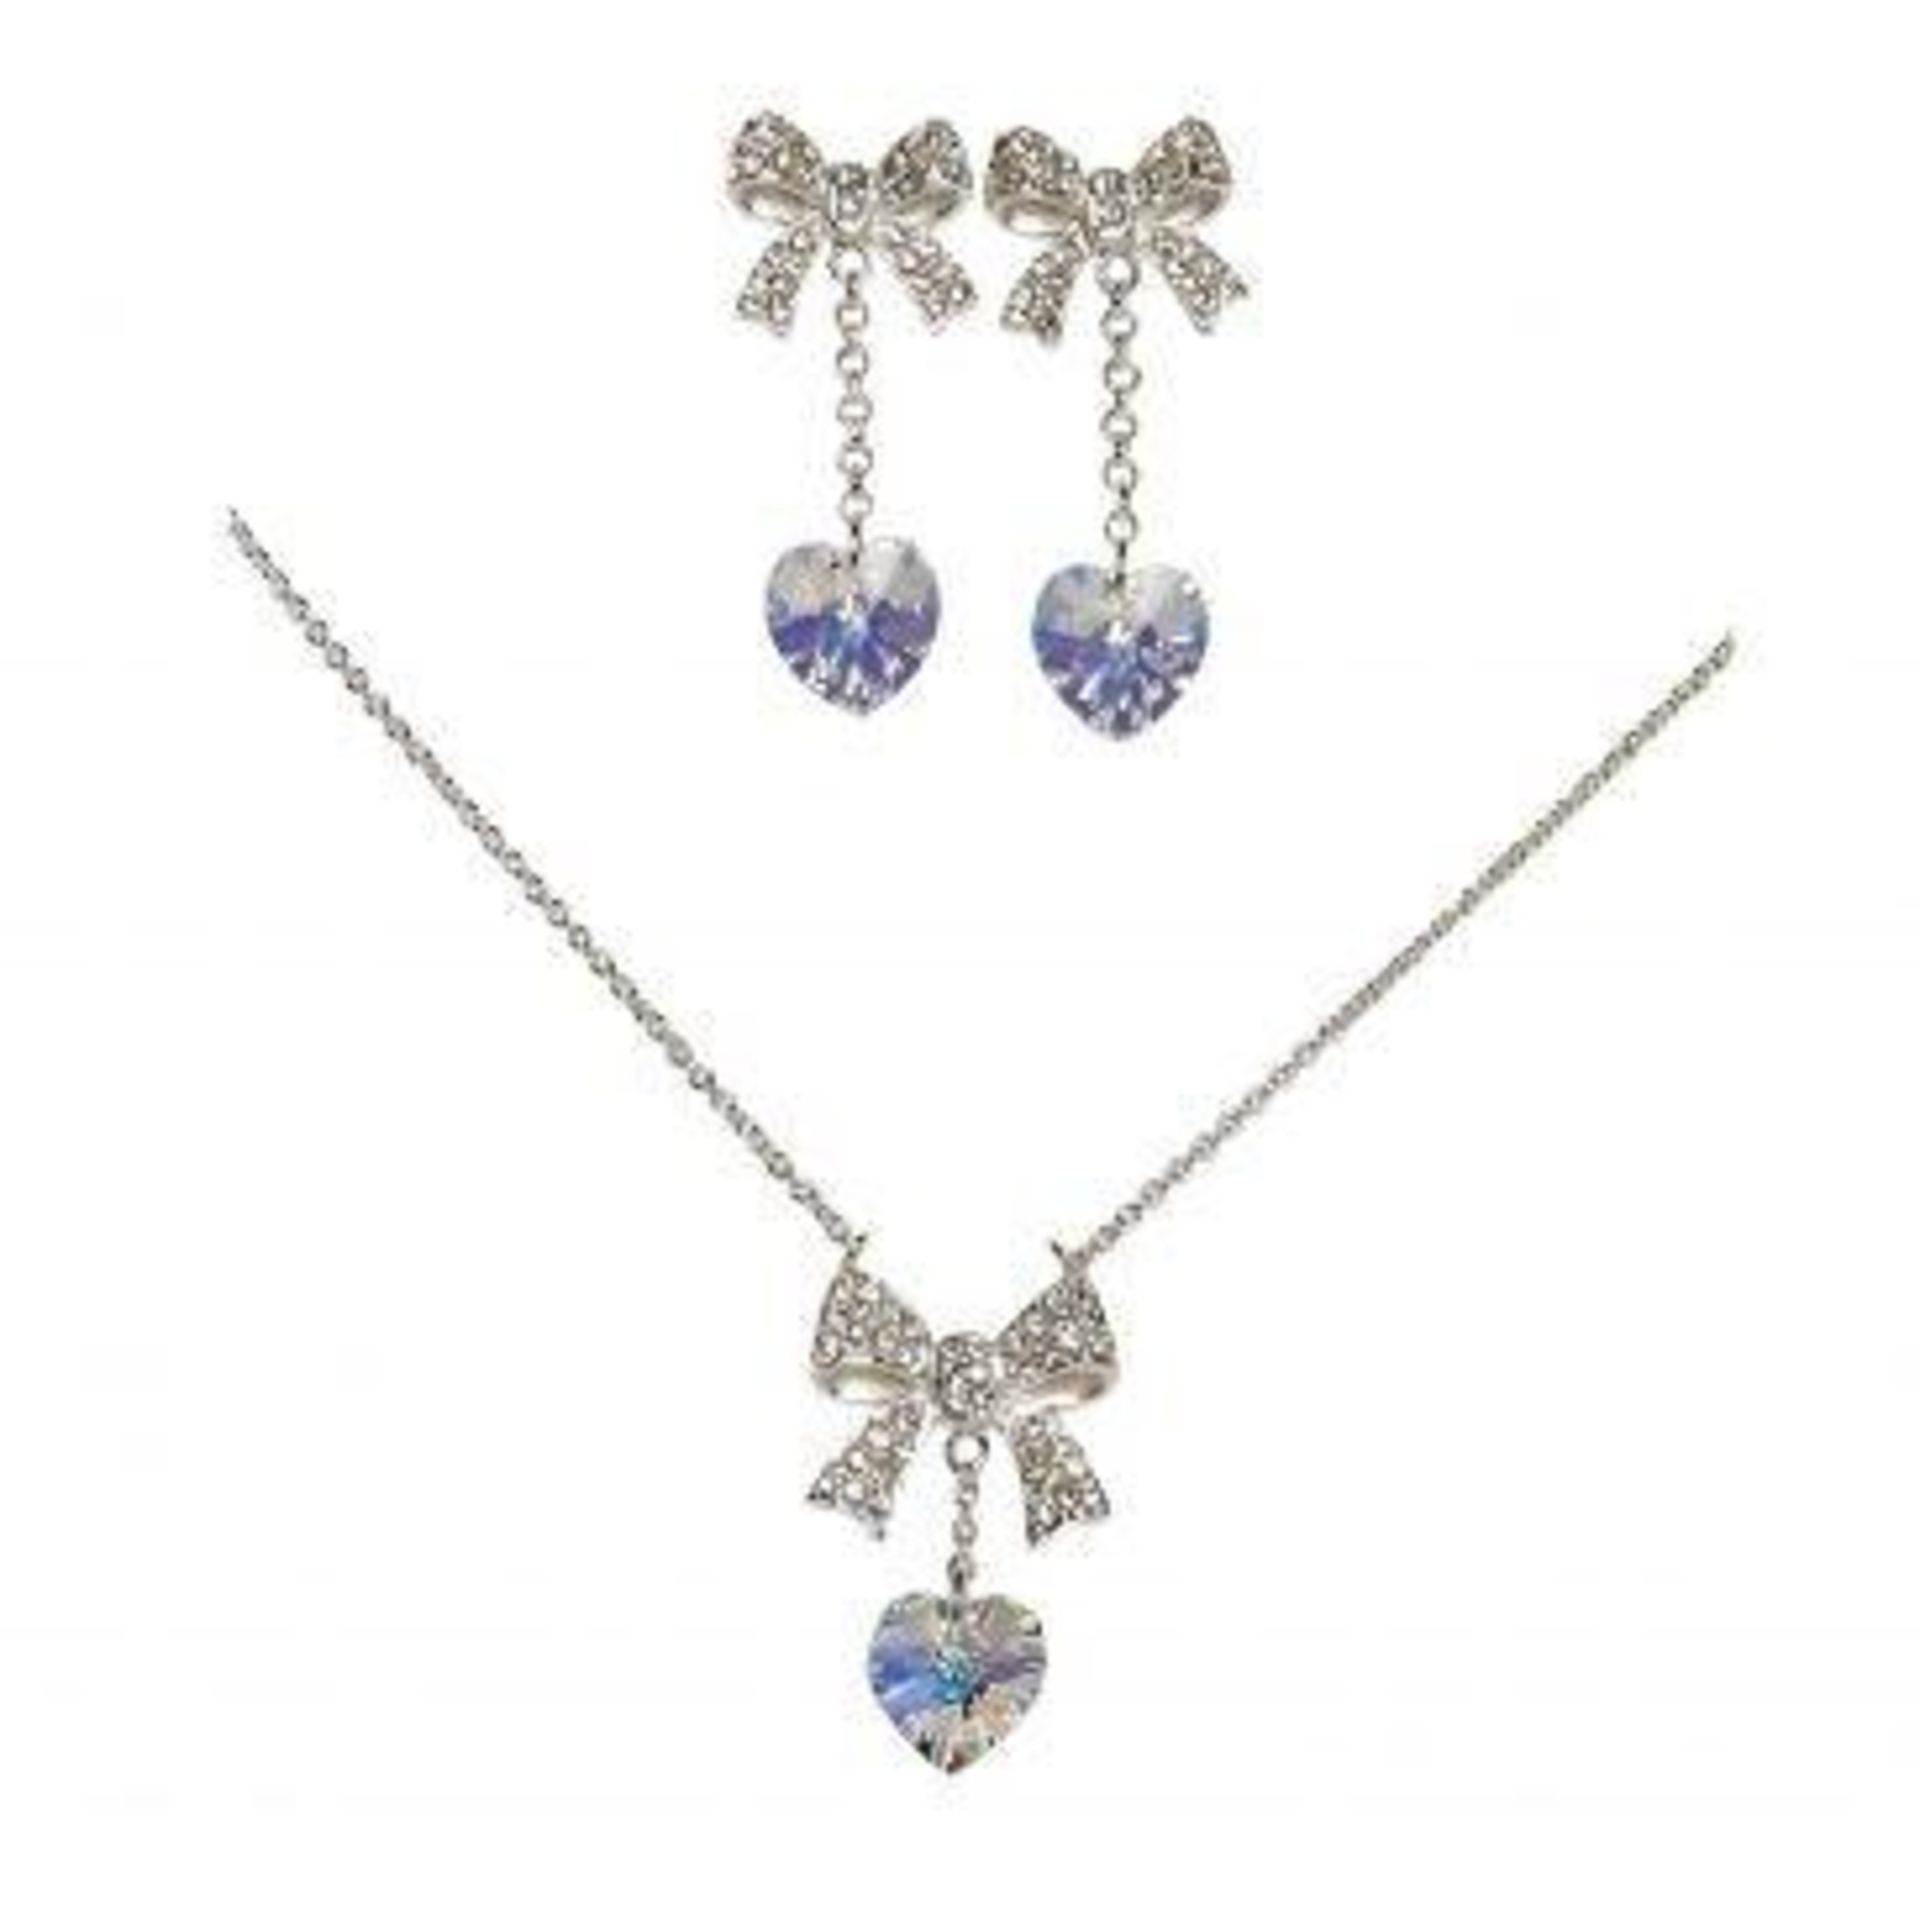 10 x HEART PENDANT AND EARRING SETS By ICE London - EGJ-9900 - Silver-tone Curb Chain Adorned With - Image 2 of 3